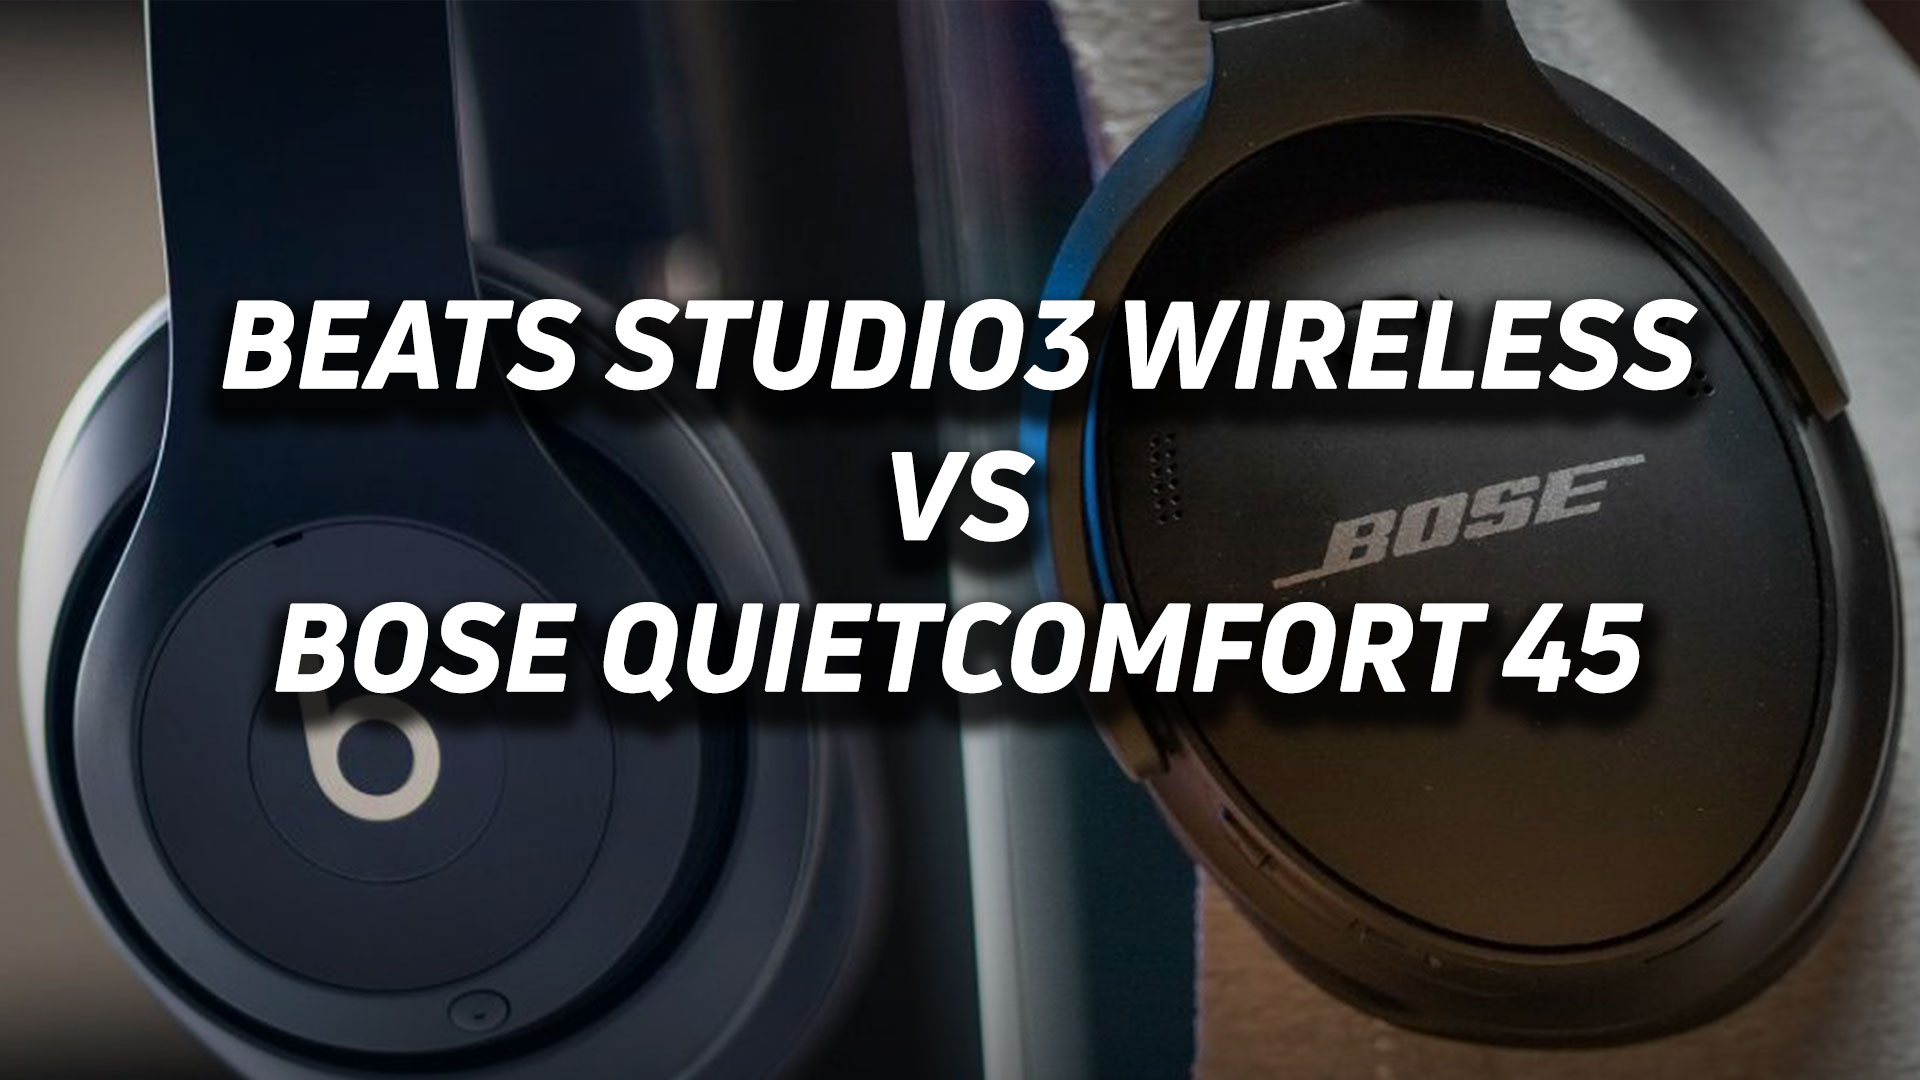 A blended image of the Beats Studio3 Wireless and Bose QuietComfort 45 noise canceling Bluetooth headphones with the appropriate versus text overlaid.